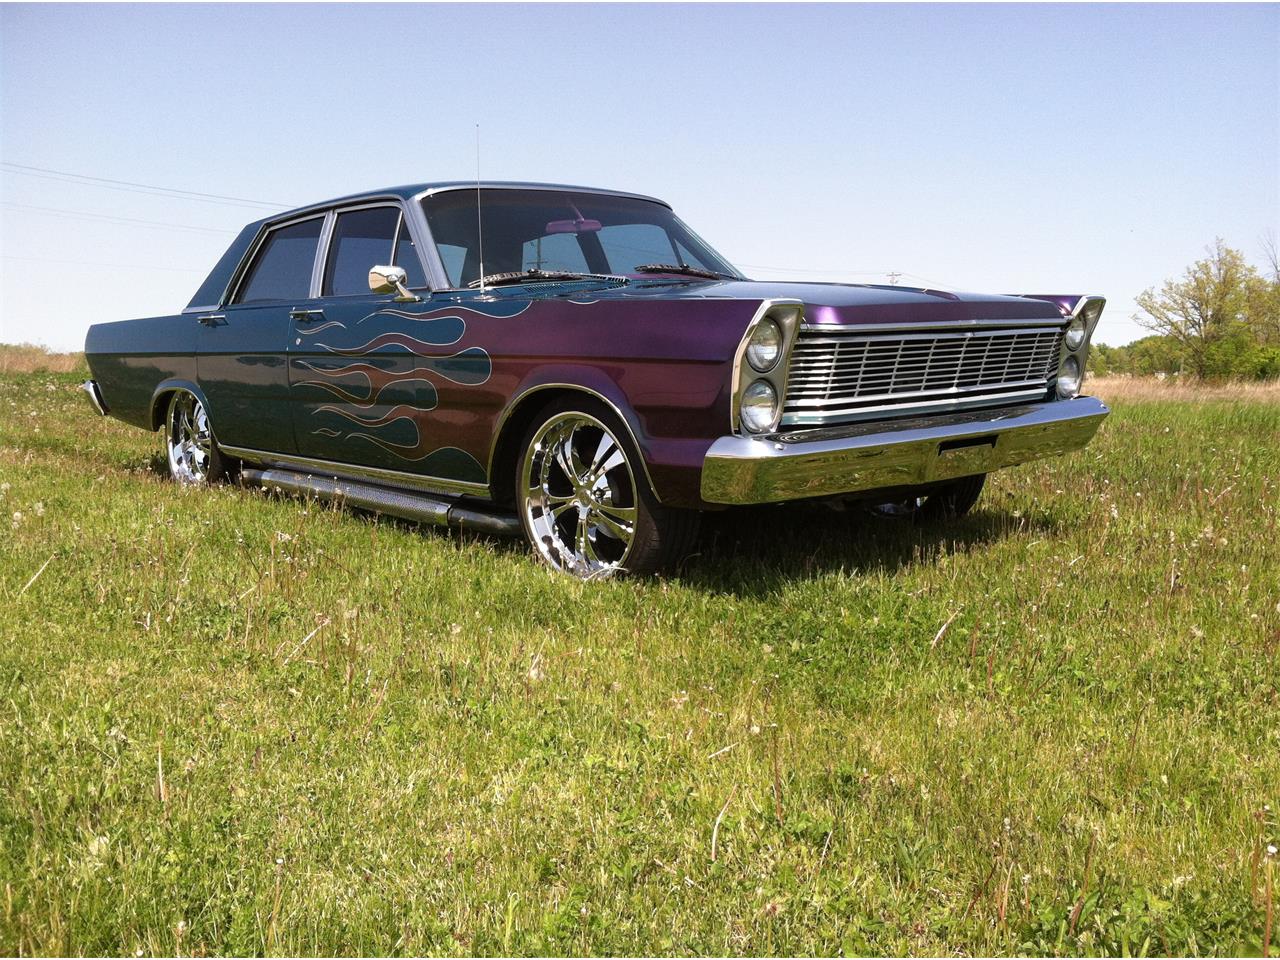 1965 Ford Galaxie Ford Galaxie Ford Galaxie 500 Cars Trucks | Images ...